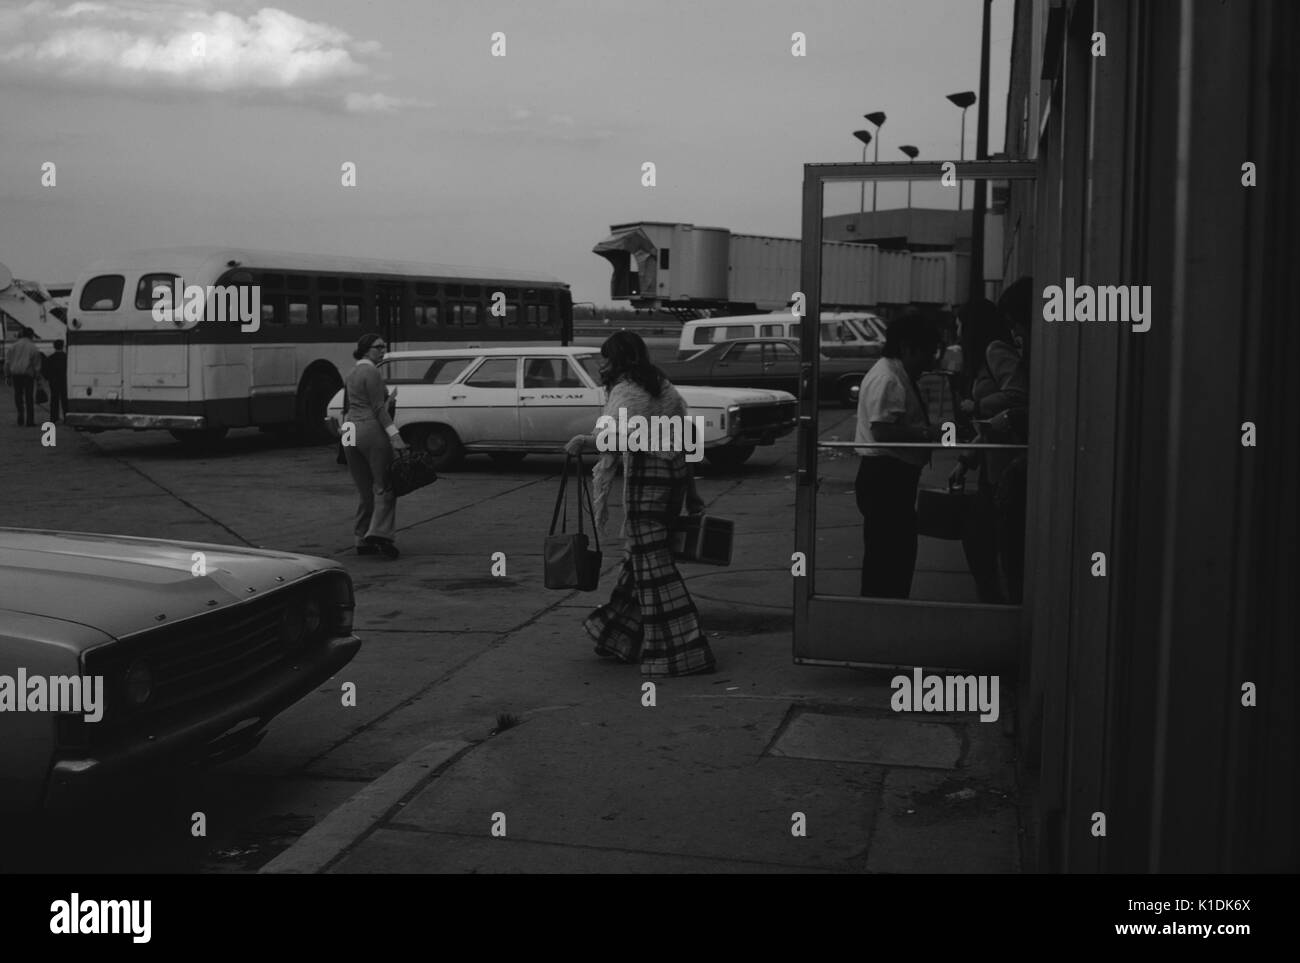 Loading and unloading arrival area in a small airport terminal with two women, one carrying bags and wearing bell bottoms, walking towards a bus, at sunset, 1966. Stock Photo